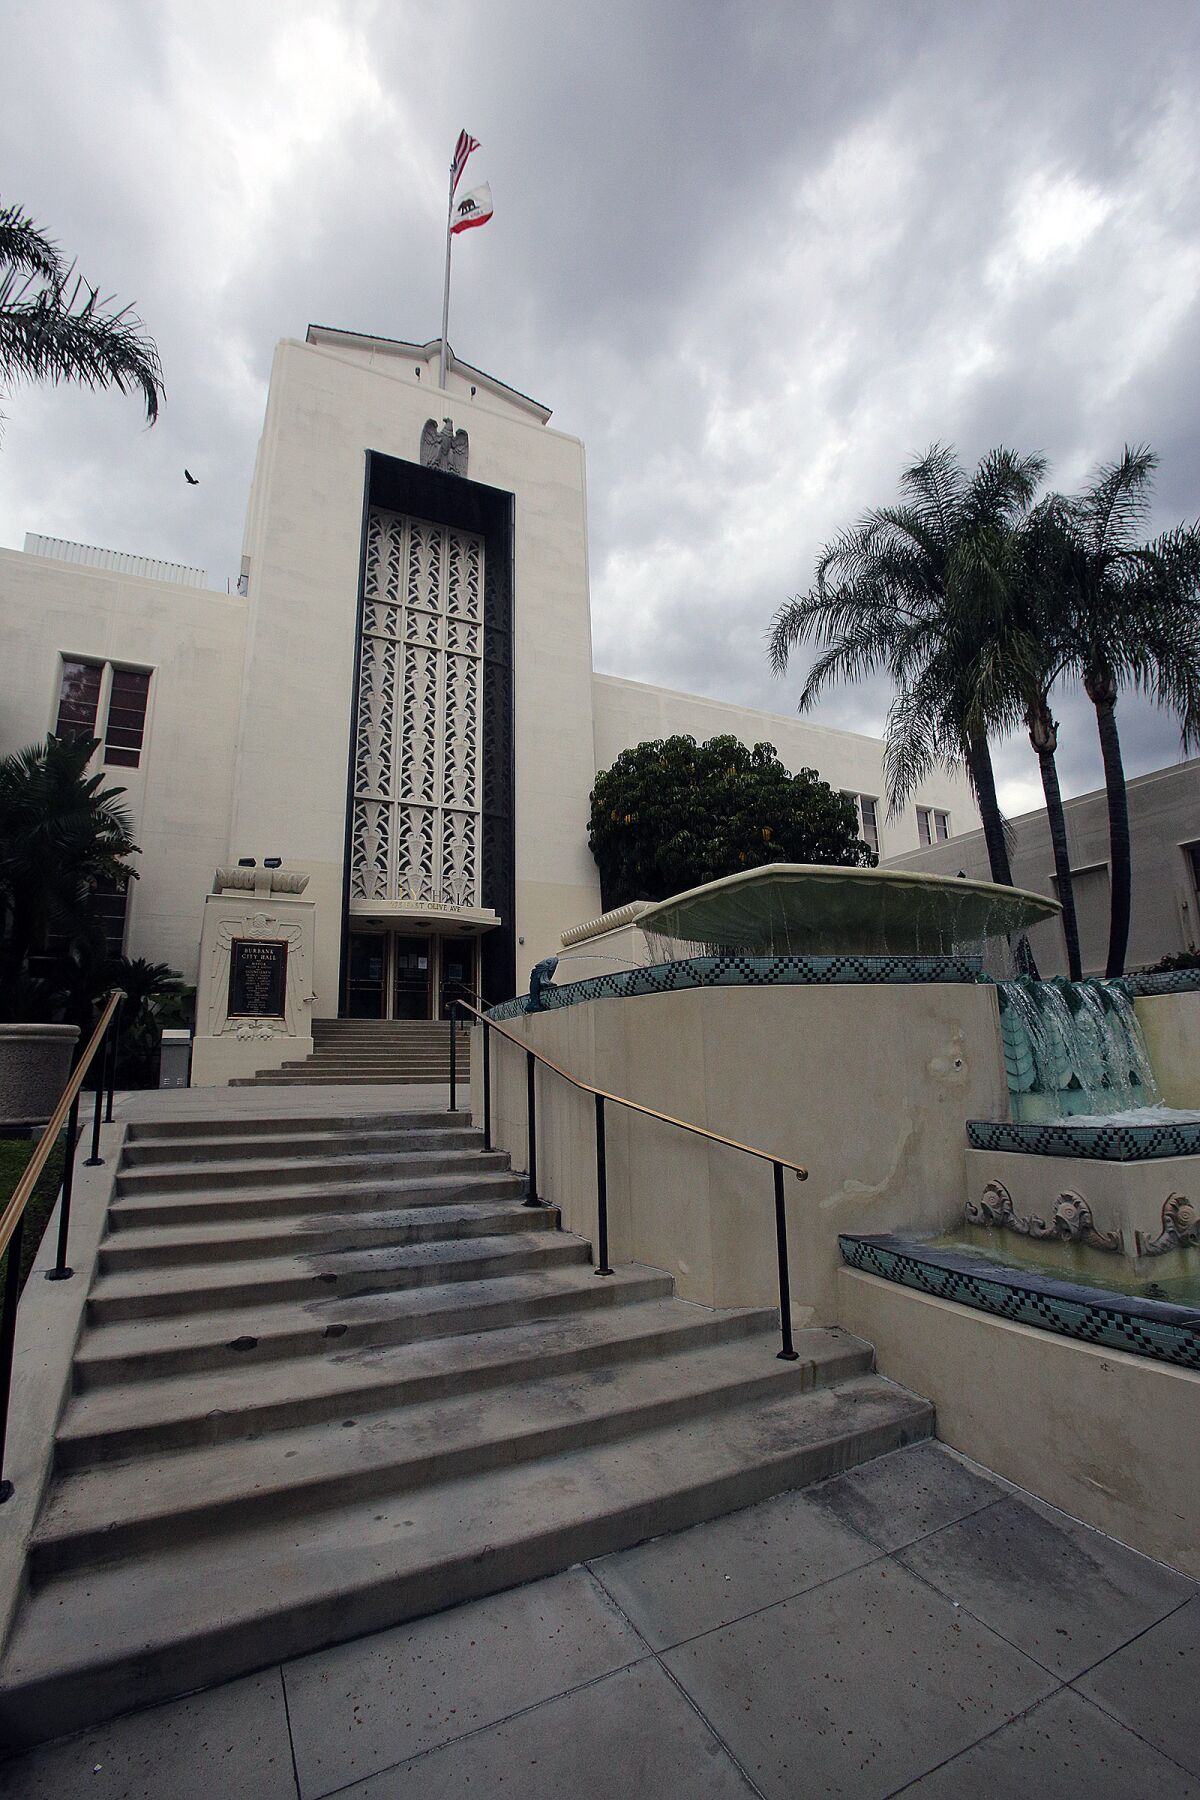 The Burbank City Council on Tuesday passed an urgency ordinance that prohibits the eviction of residential and commercial renters in the city.